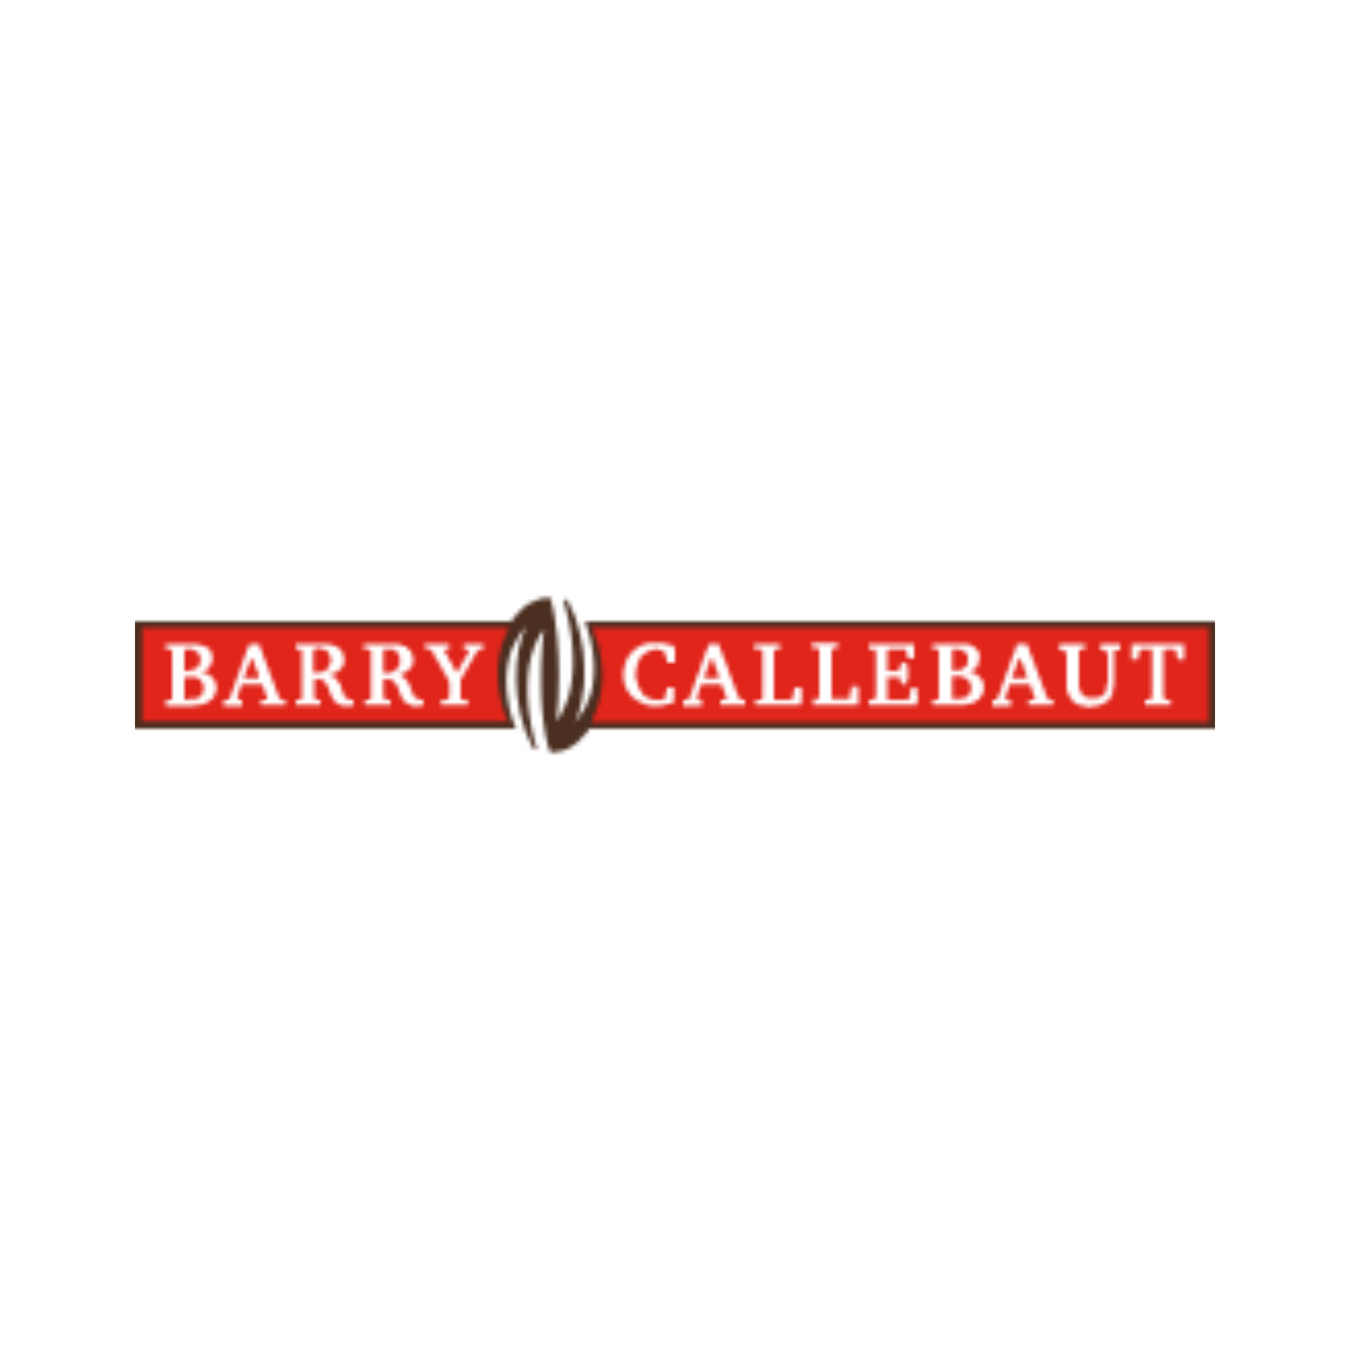 BARRY CALLEBAUT couverture chocolate, perfect for exquisite confections.